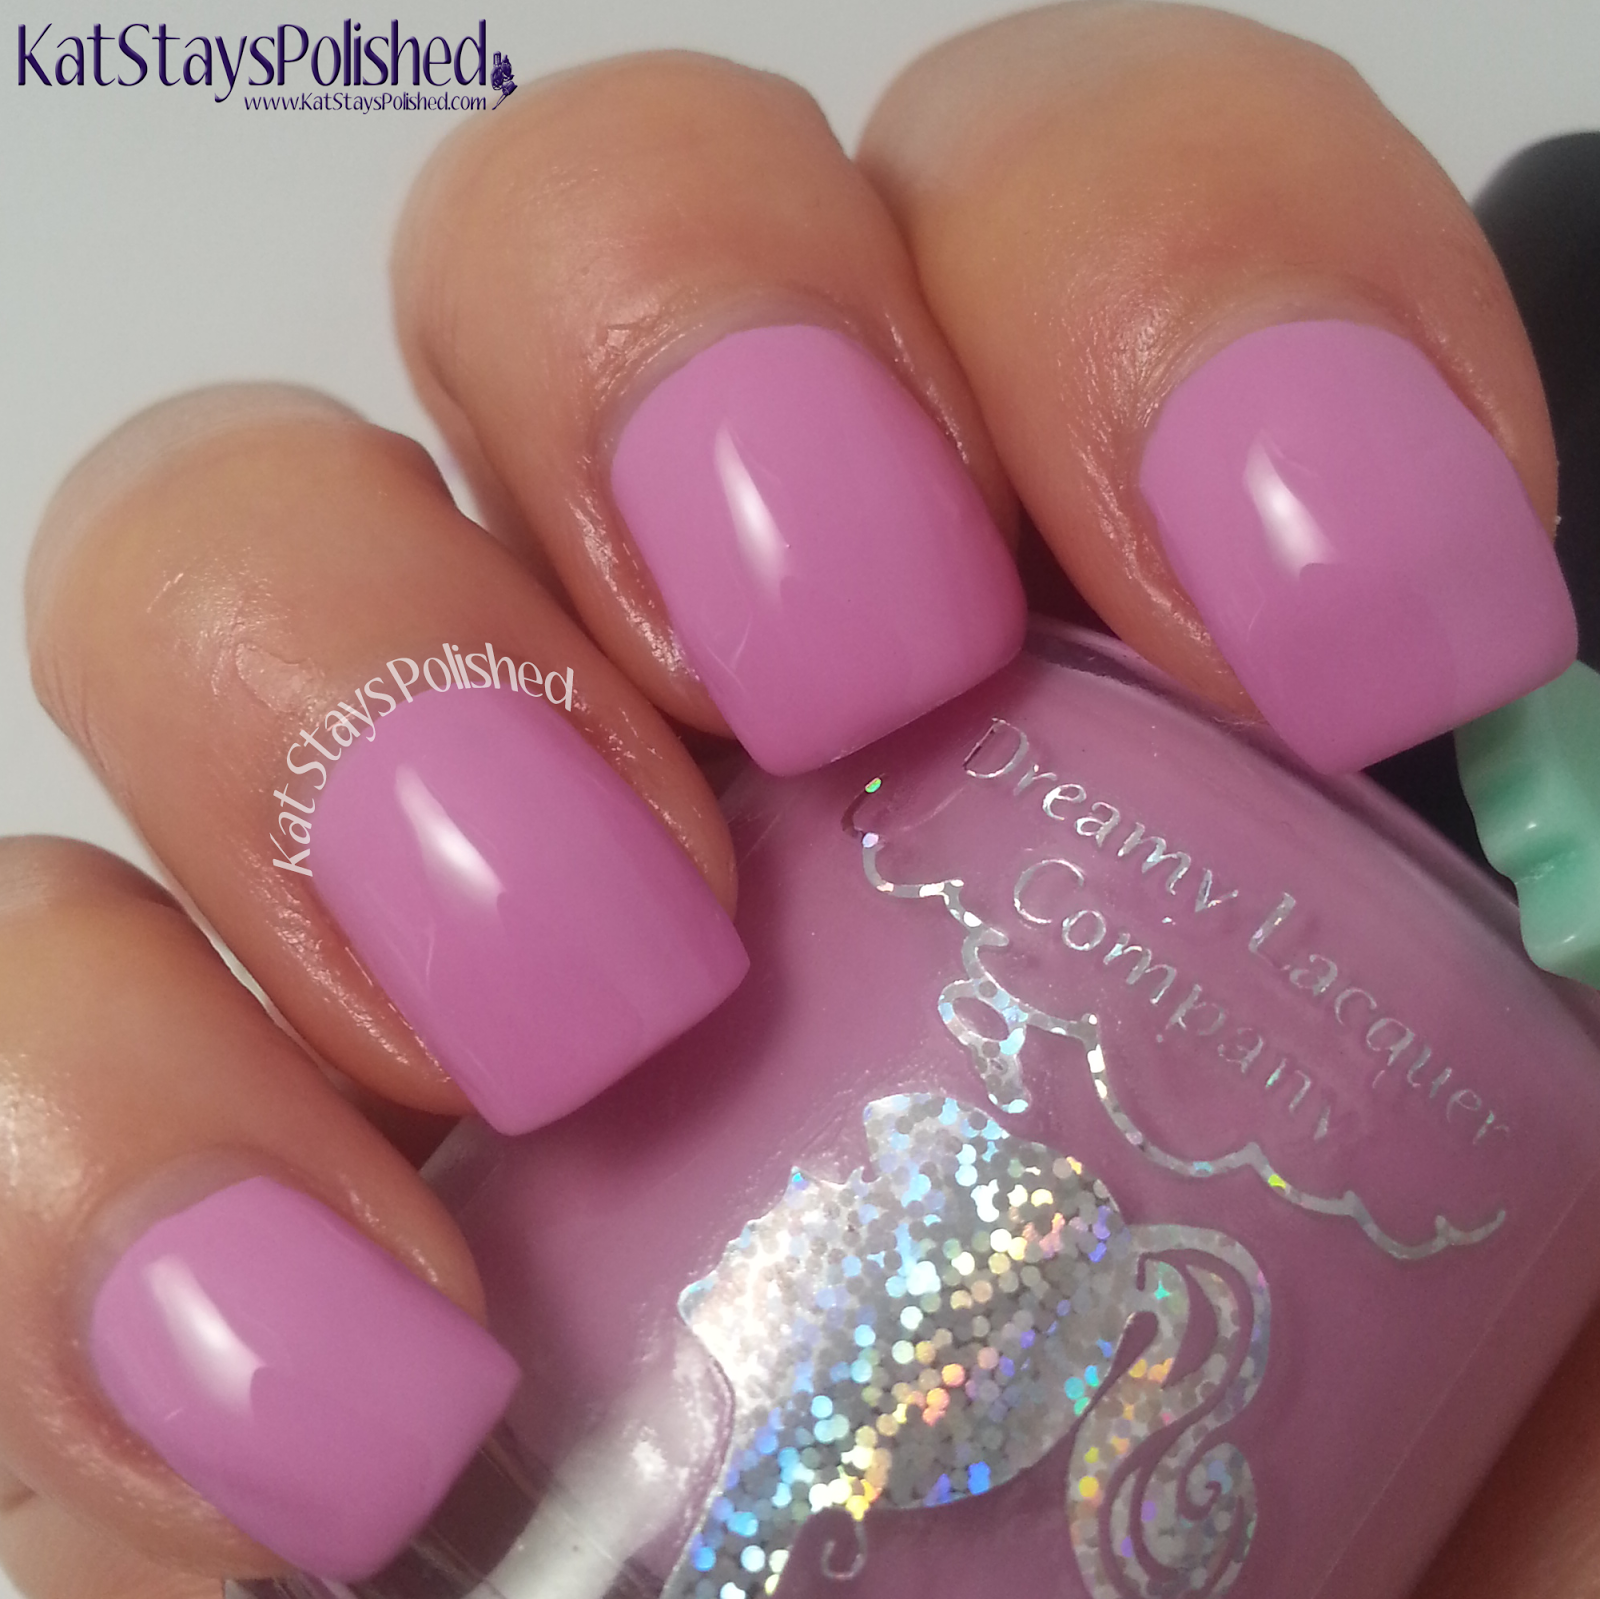 Dreamy Lacquer Company - Strawberries & Cream | Kat Stays Polished